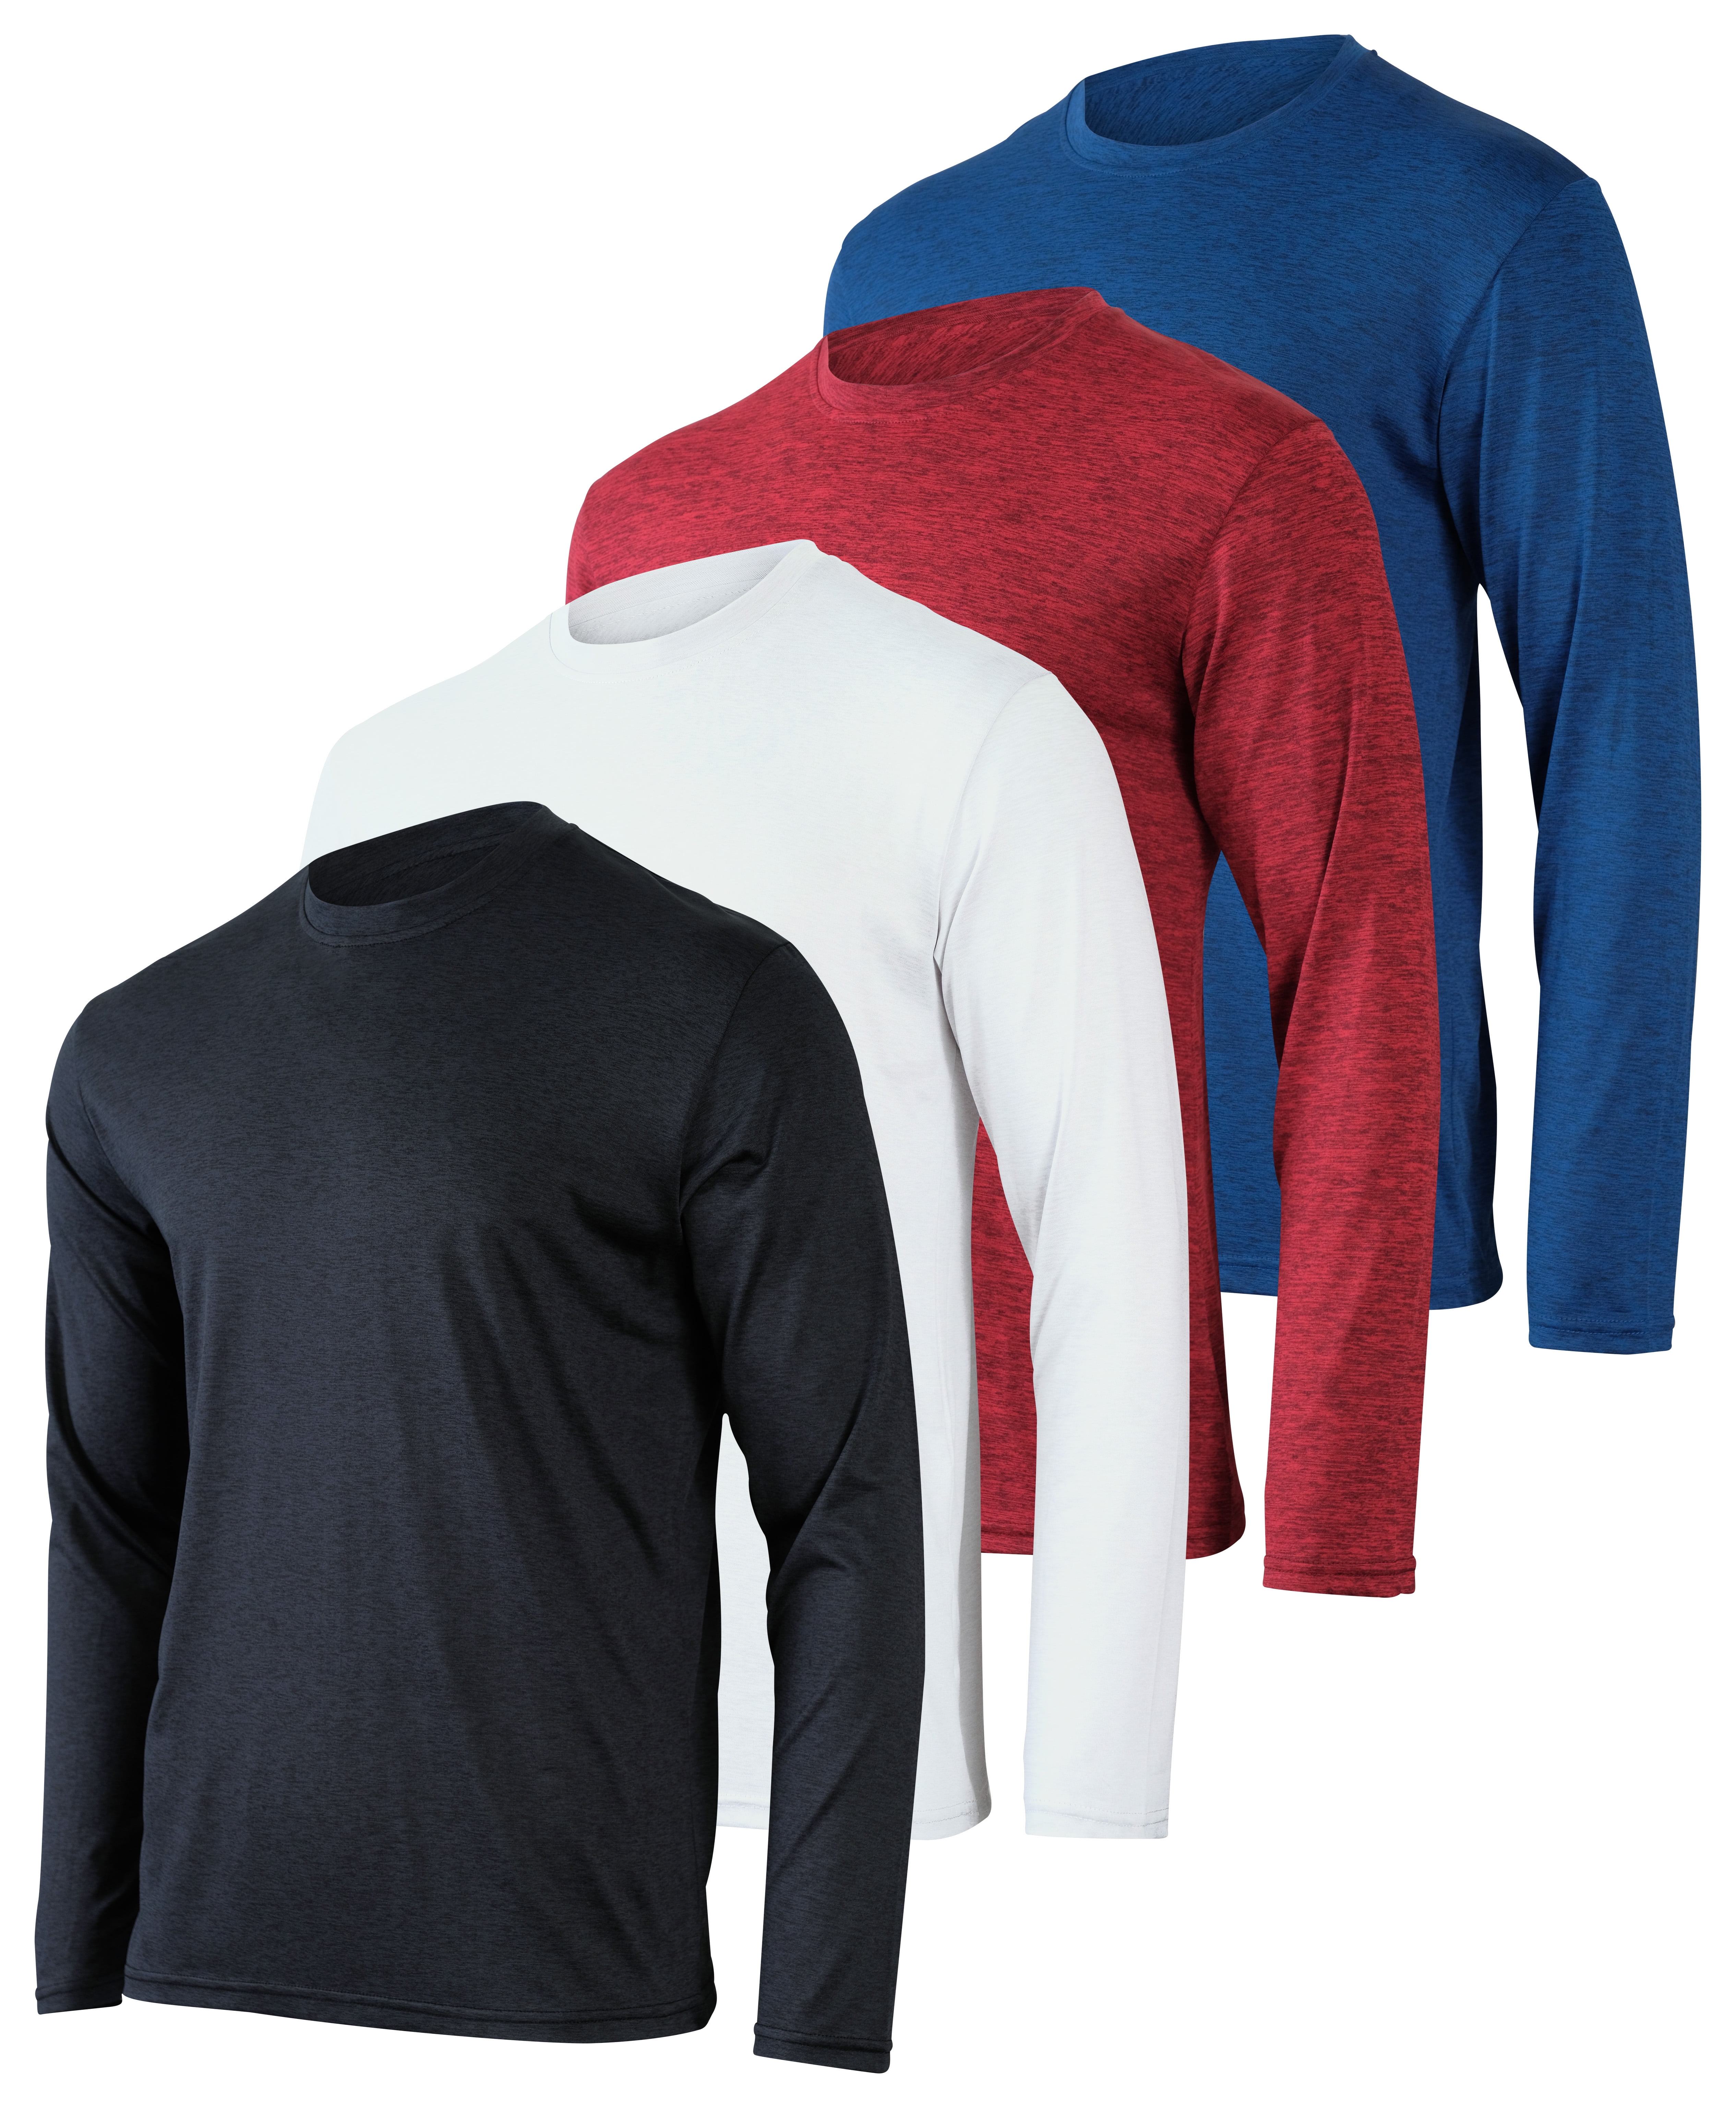 election Untouched how 4 Pack: Men's Dry-Fit Moisture Wicking Performance Long Sleeve T-Shirt, UV  Sun Protection Outdoor Active Athletic Crew Top - Walmart.com